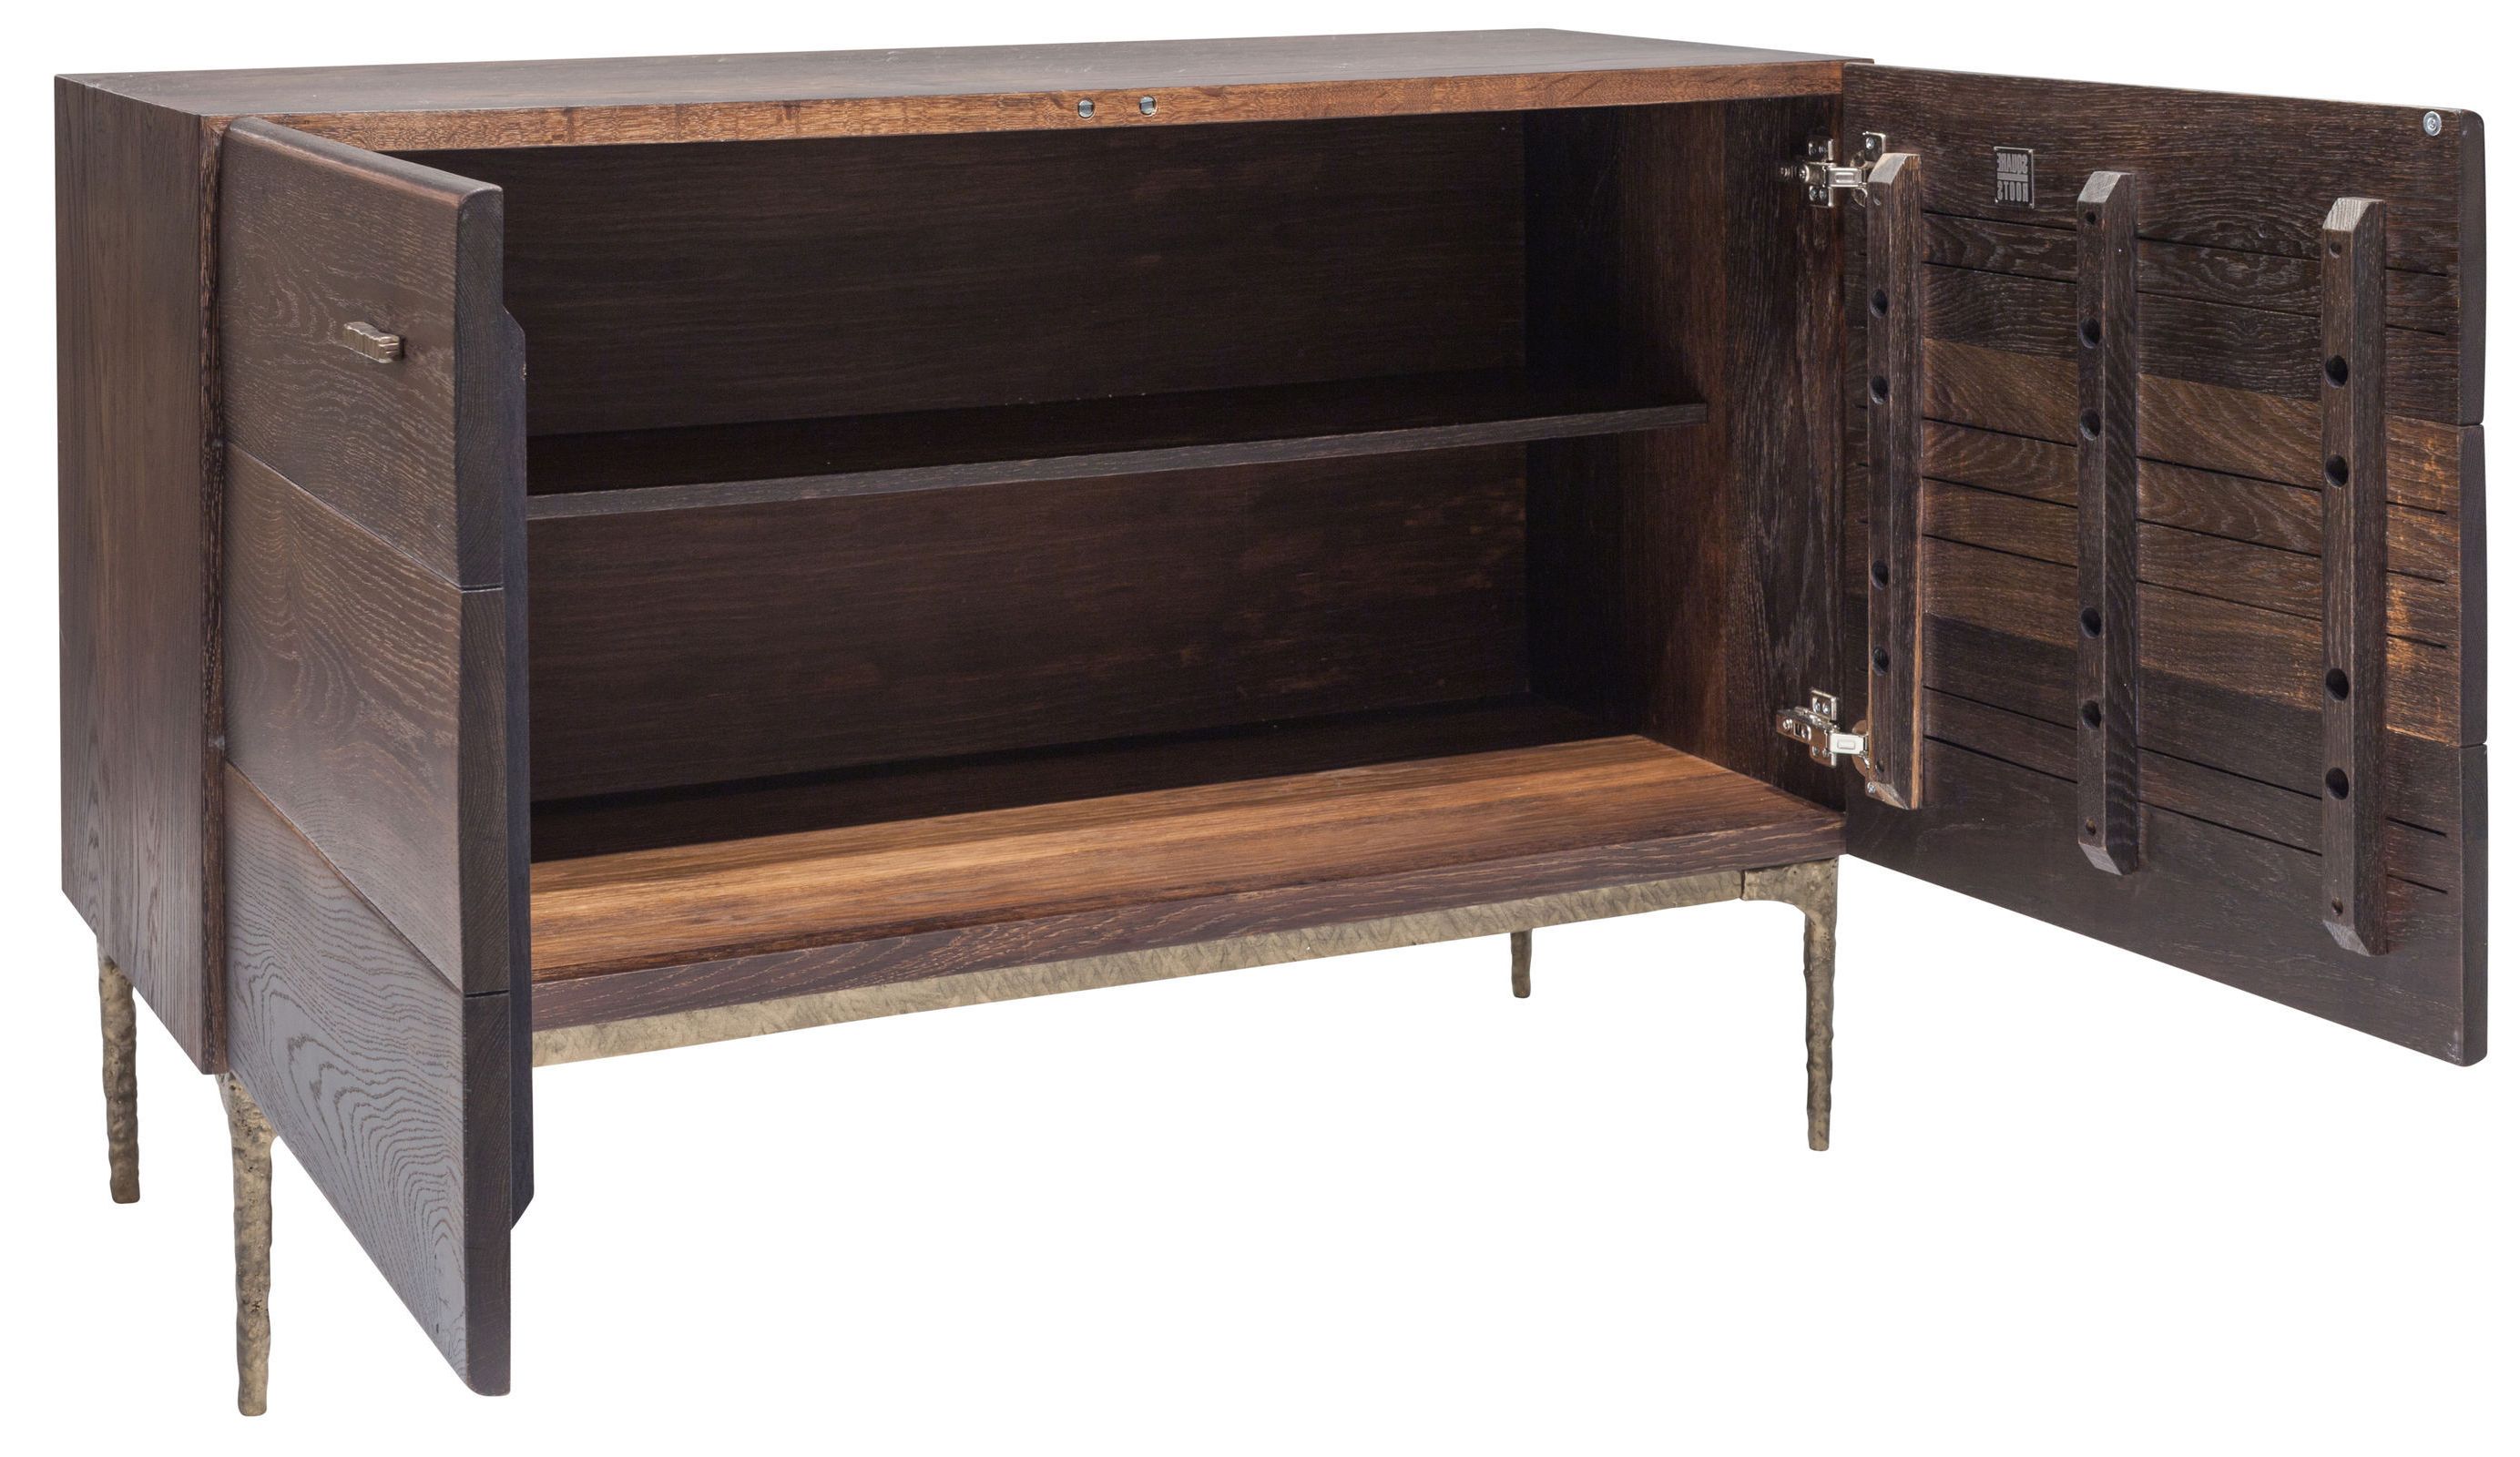 Widely Used Kulu Sideboard Buffet In Seared Oak And Gilded Bronze Cast Iron Legs Inside Iron Sideboards (View 15 of 20)